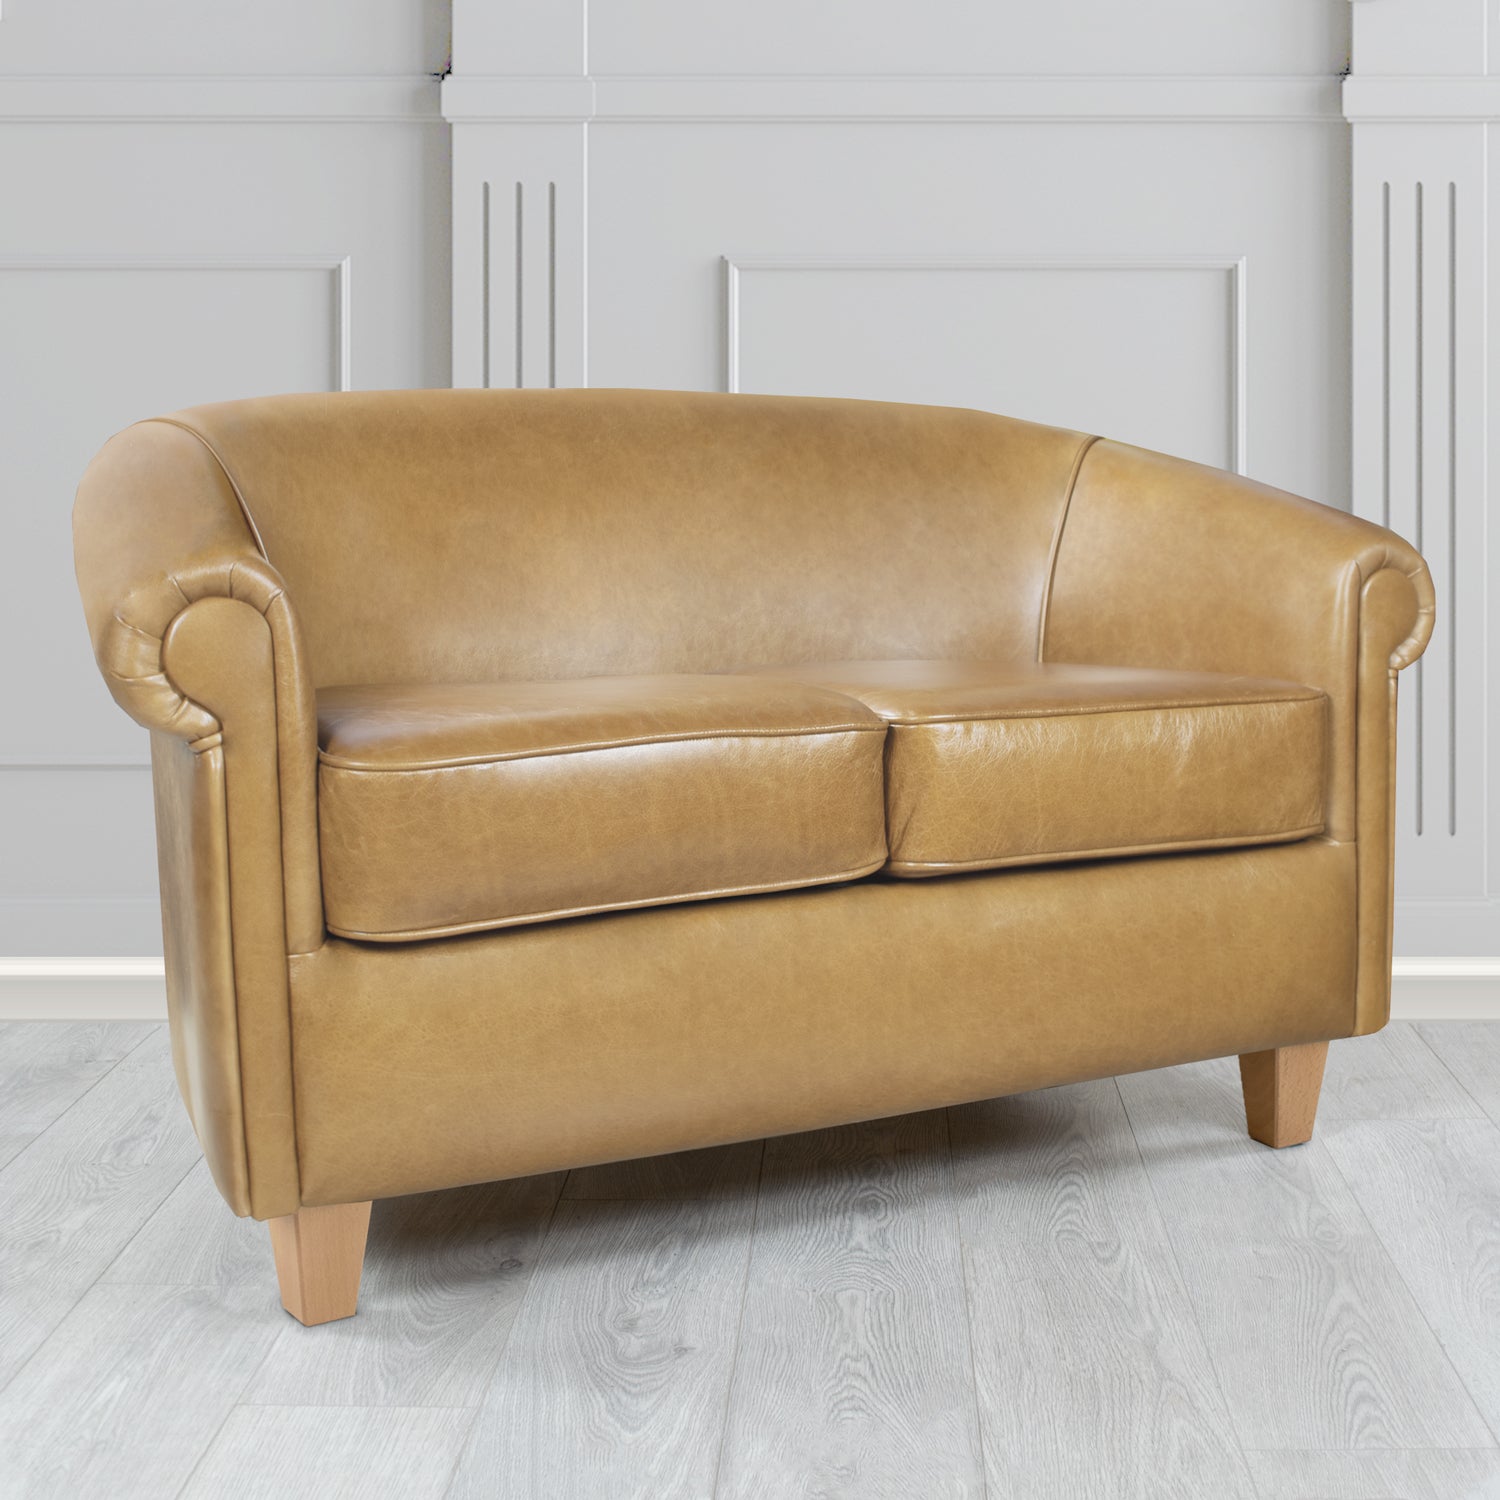 Siena 2 Seater Tub Sofa in Crib 5 Old English Parchment Genuine Leather - The Tub Chair Shop